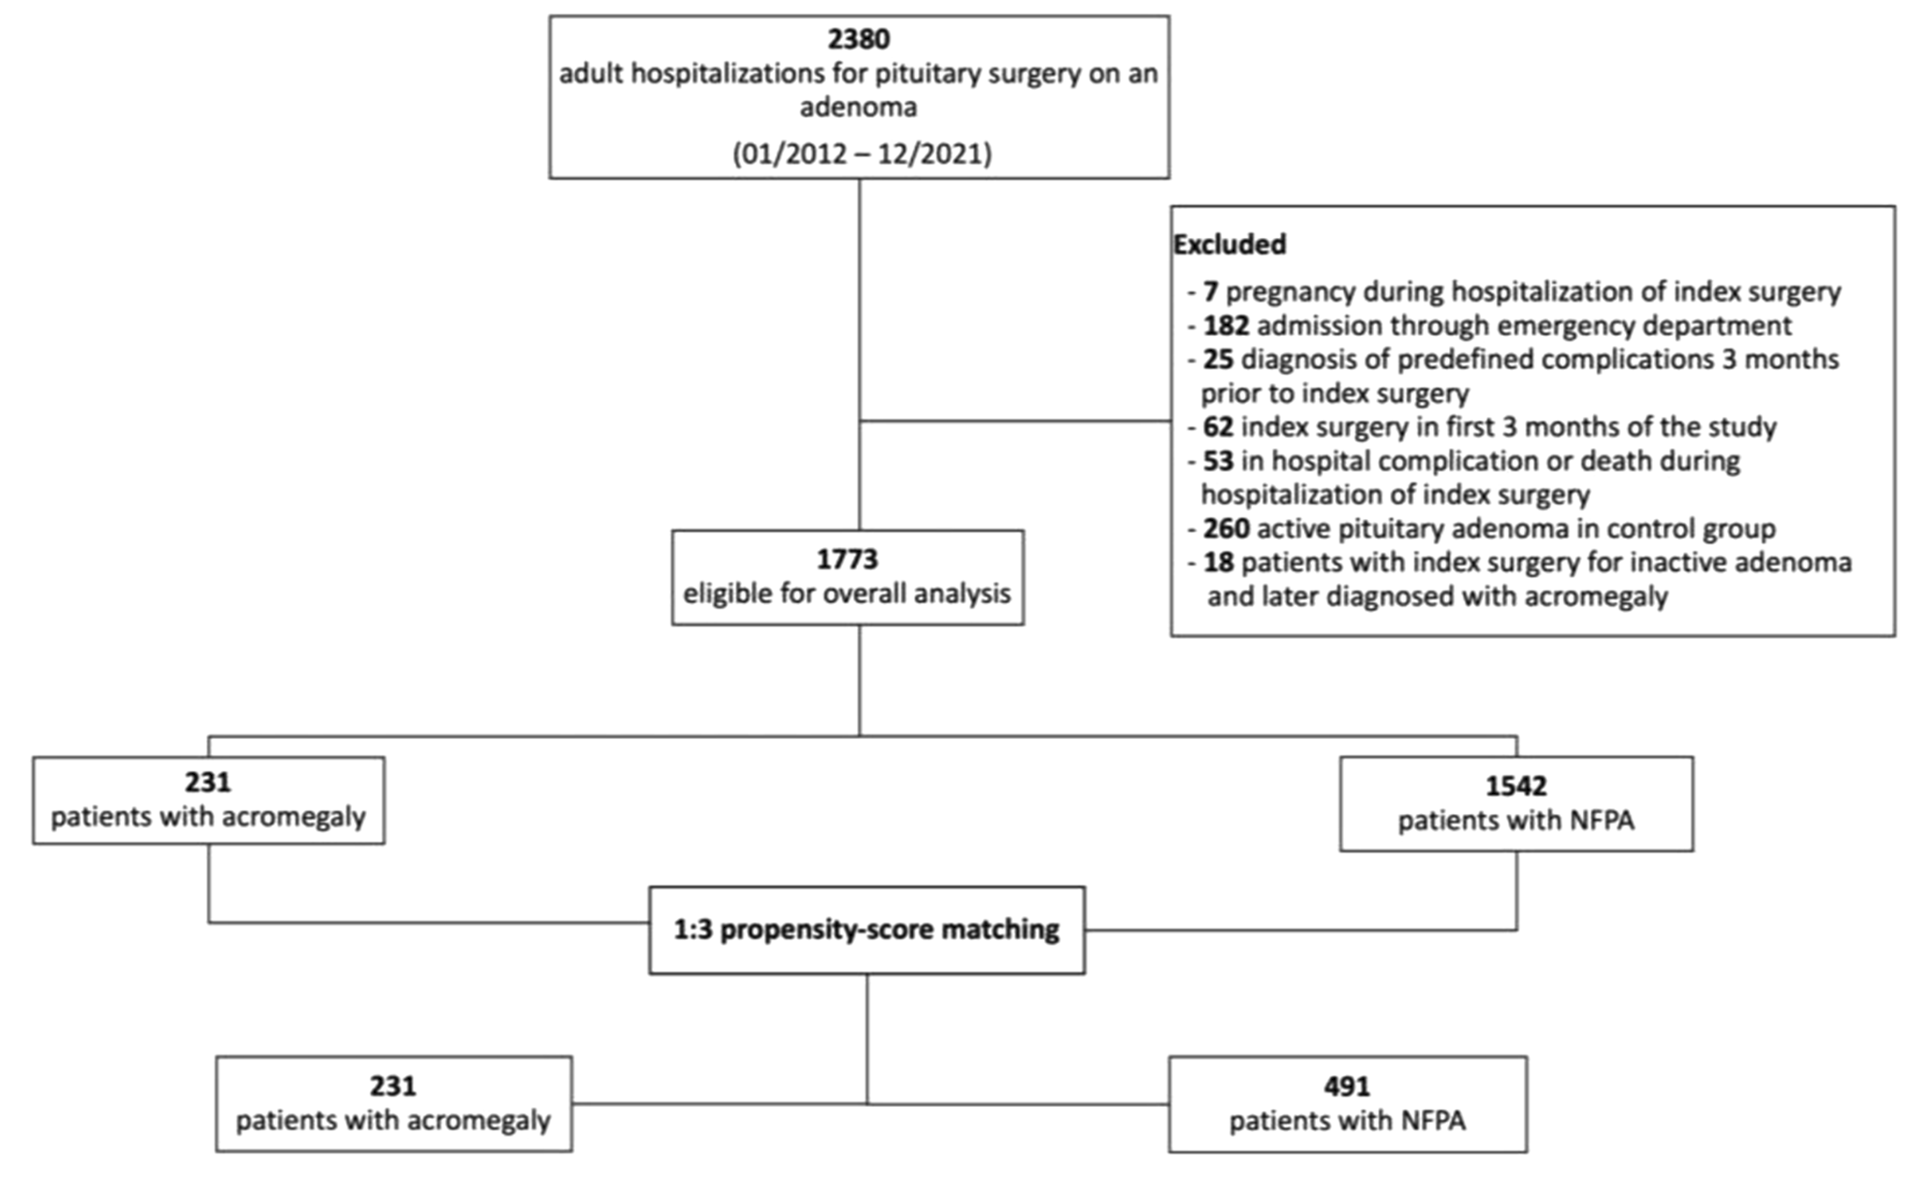 Cardiovascular risk in patients with acromegaly vs. non-functioning pituitary adenoma following pituitary surgery: an active-comparator cohort study